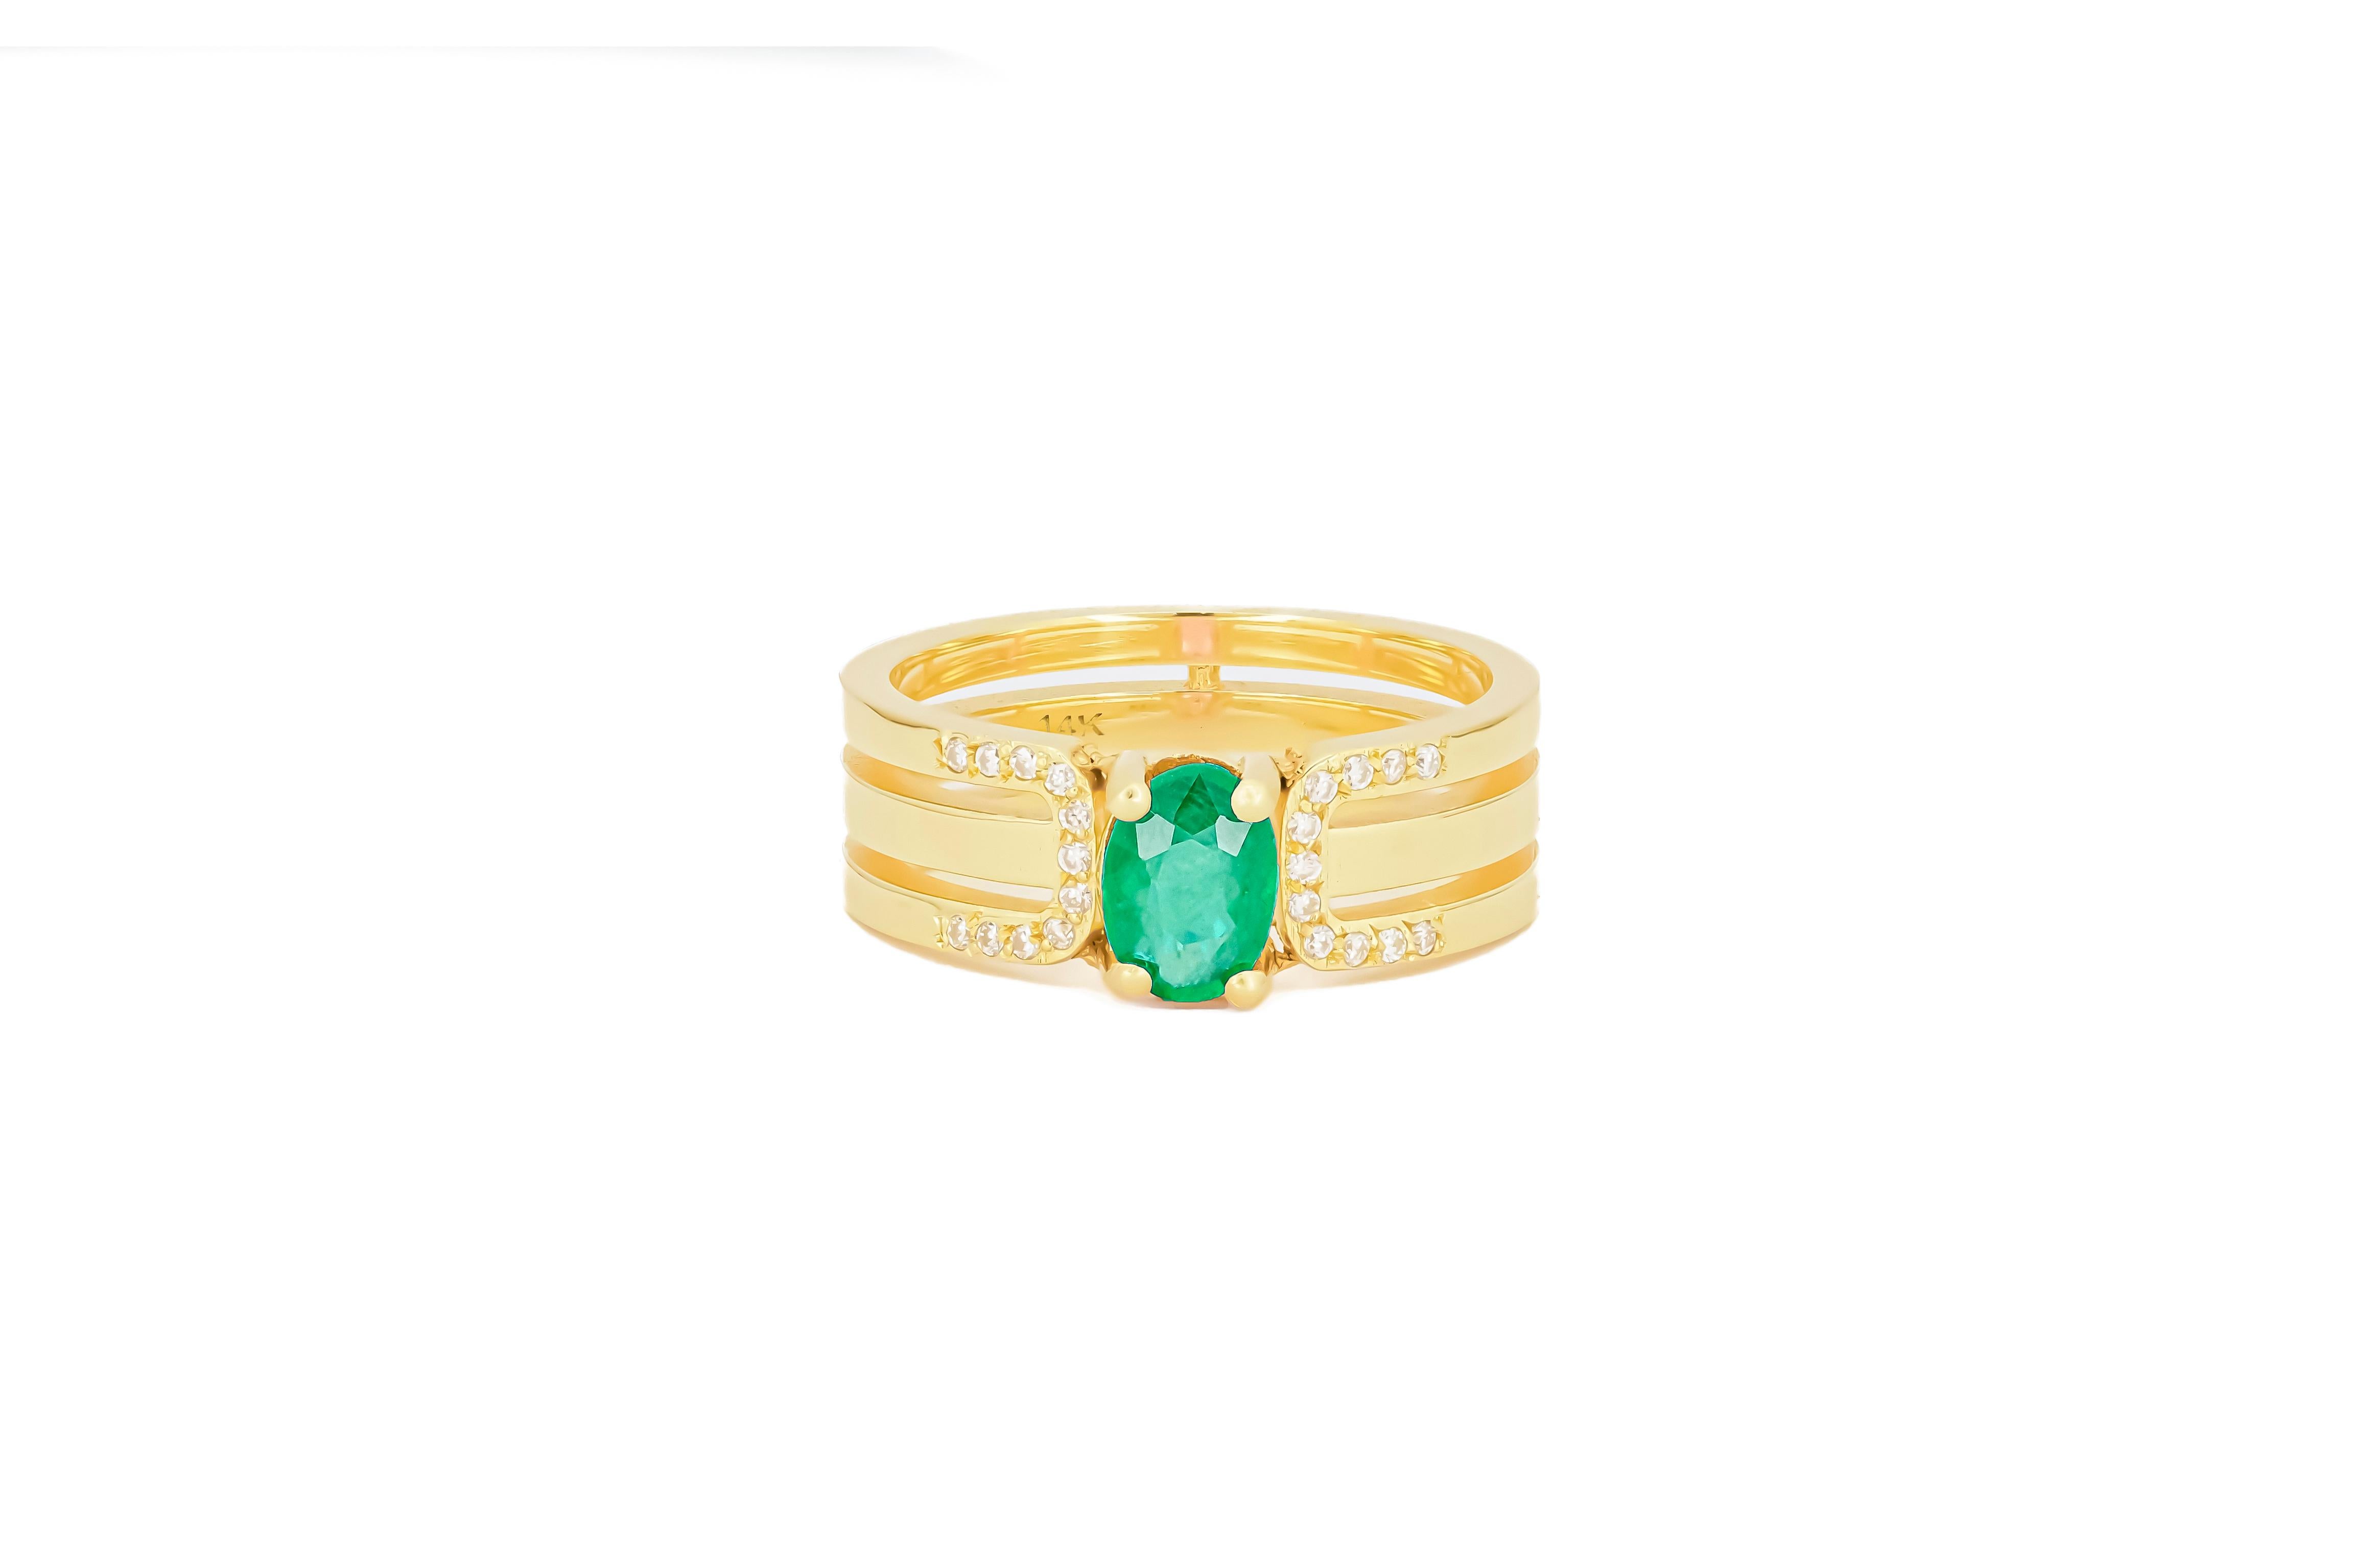 Men's emerald 14k gold ring. 
Oval Emerald gold ring. Men's gold ring. 14k gold emerald ring for men.  May birthstone ring for men. 14 kt solid gold ring with natural emeralds and diamonds - men's emerald ring. May birthstone.

Metal type: 14kt